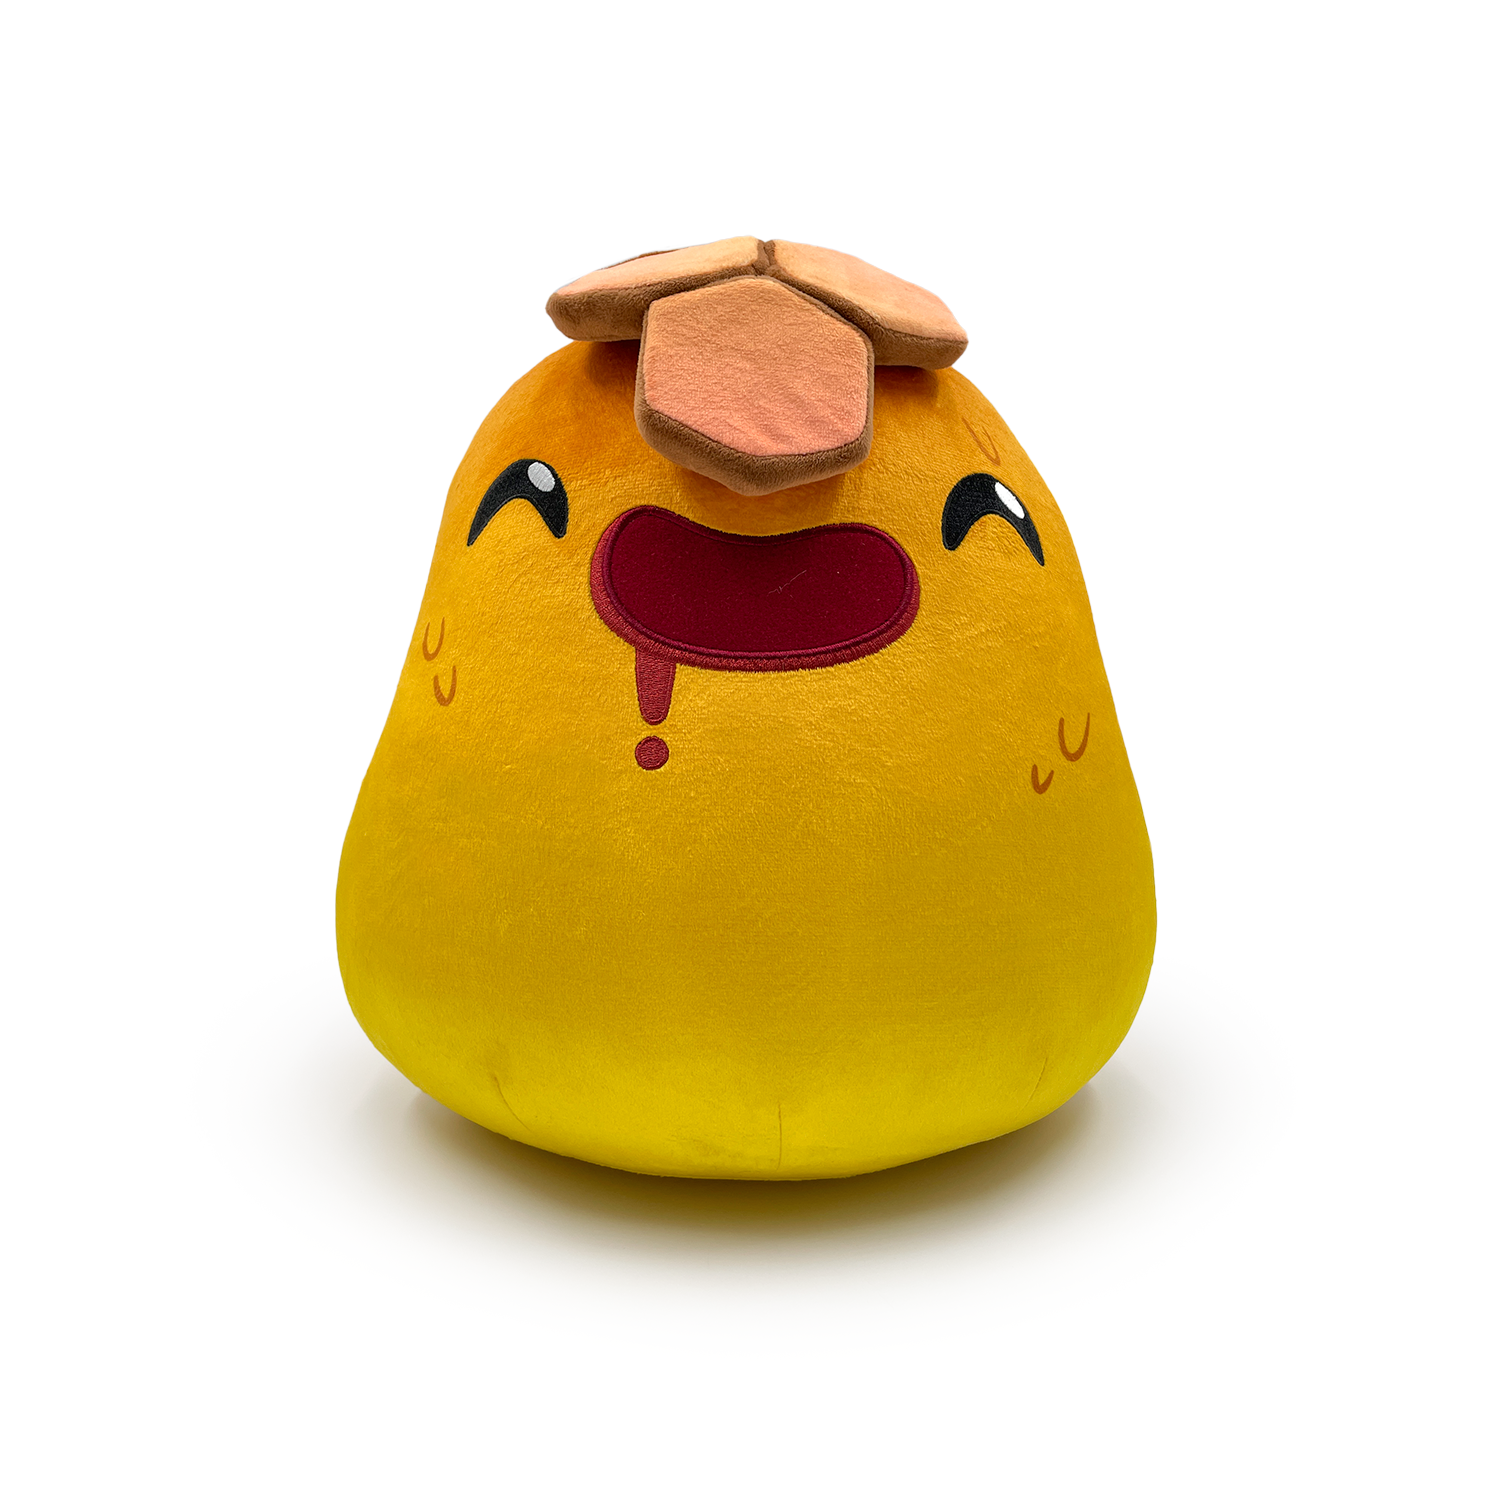 Squishy Silicone Honey Slime Slime Rancher -  Portugal